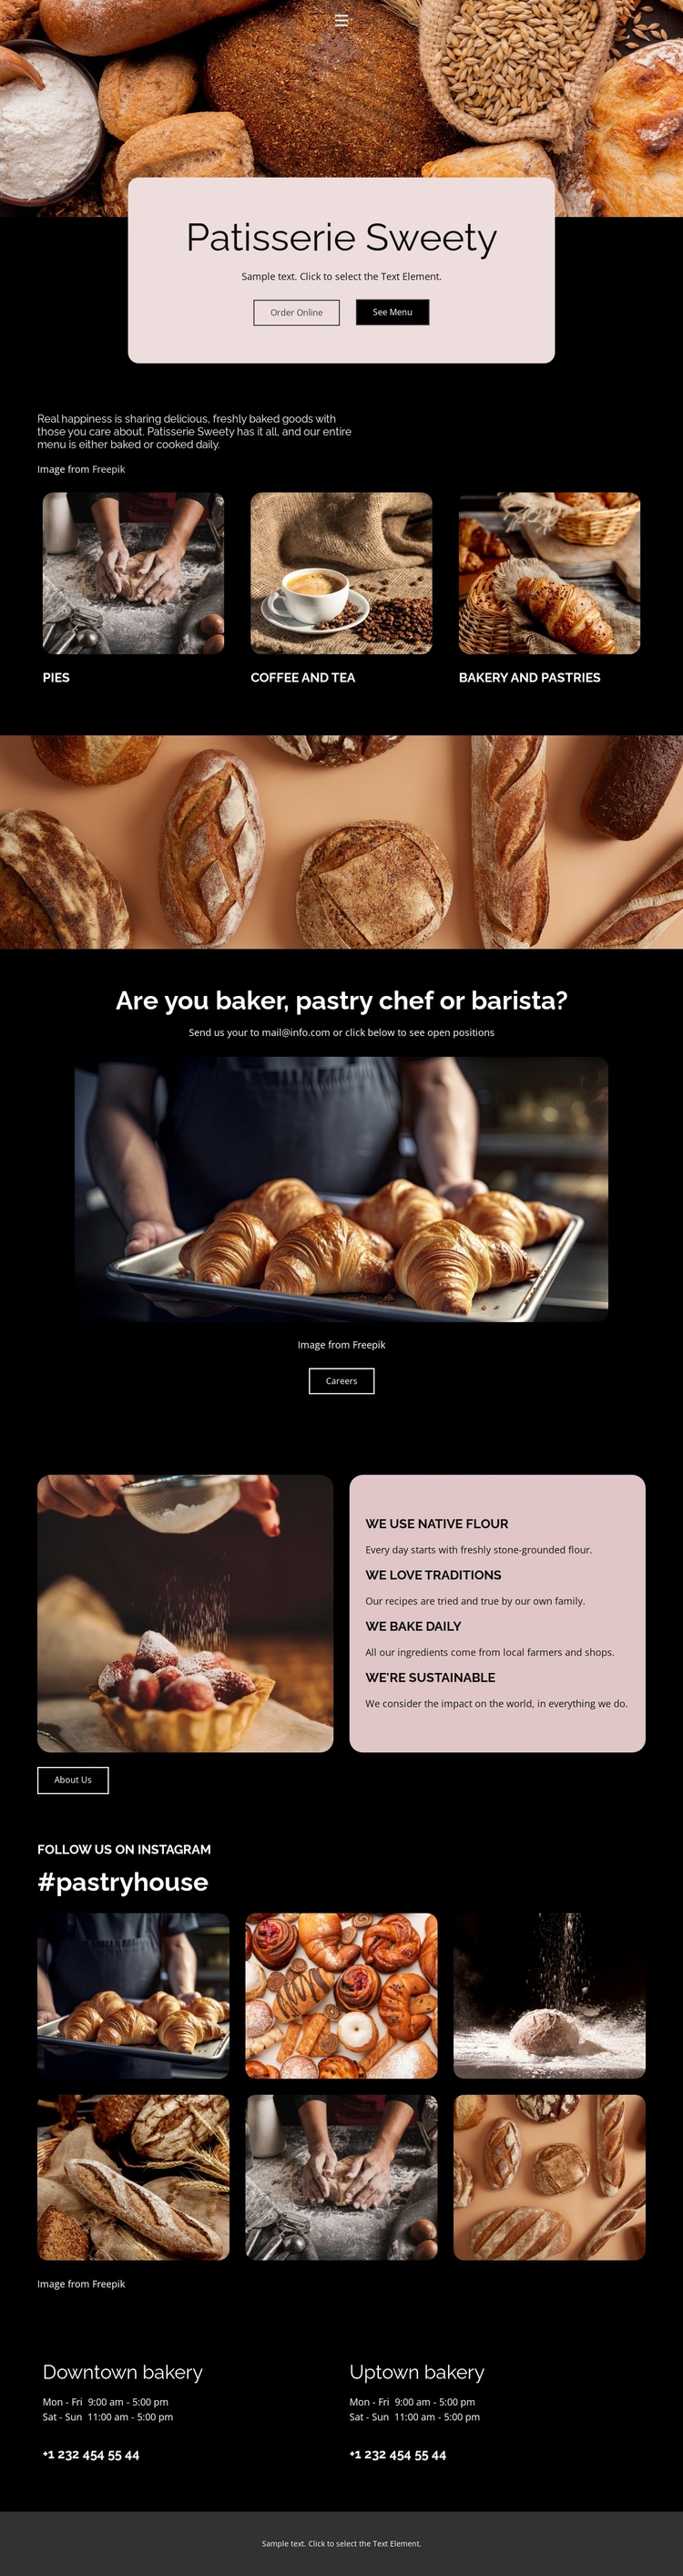 We love traditions Landing Page